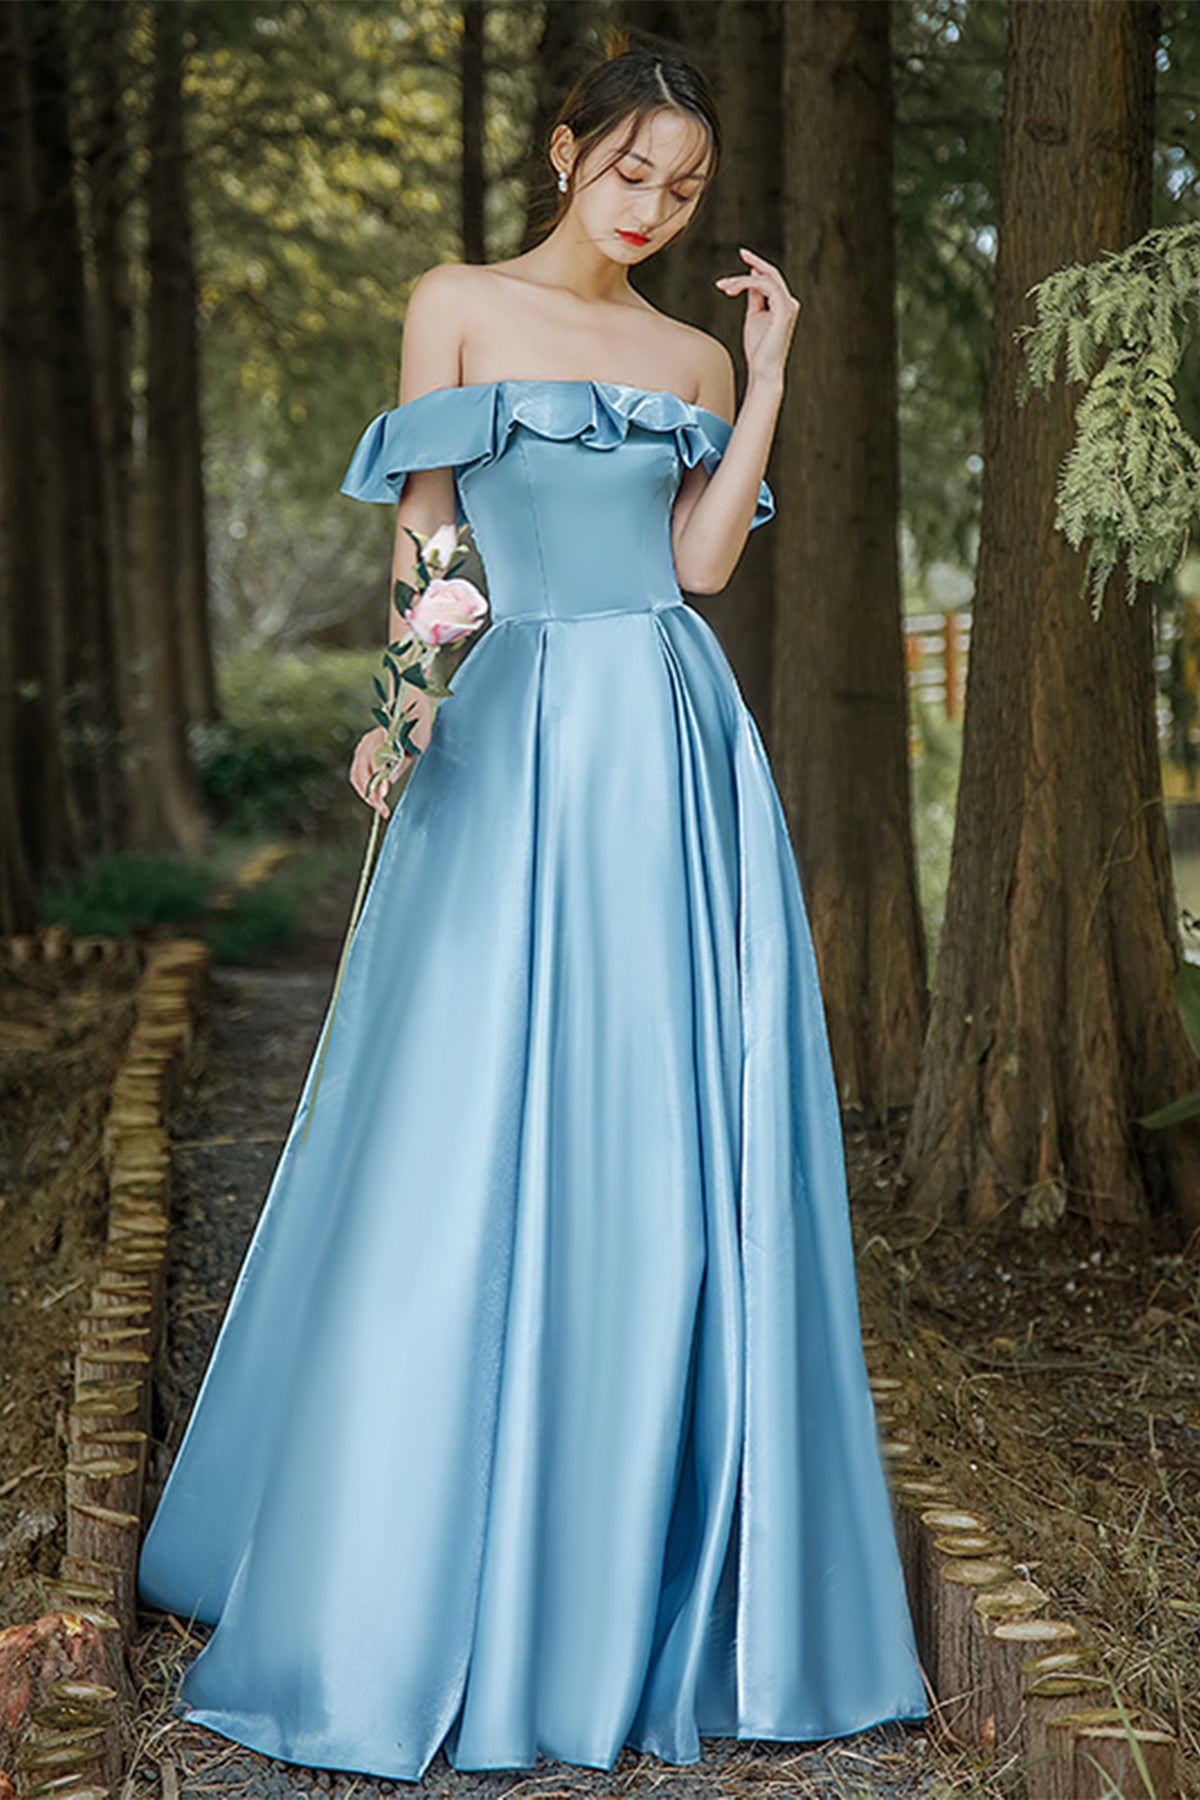 Royal Blue Ball Gown Prom Dresses 2020 Off The Shoulder Lace 3D Flowers  Beaded Corset Back Satin Formal Evening Dress Party Gowns From Freedomlife,  $136.69 | DHgate.Com